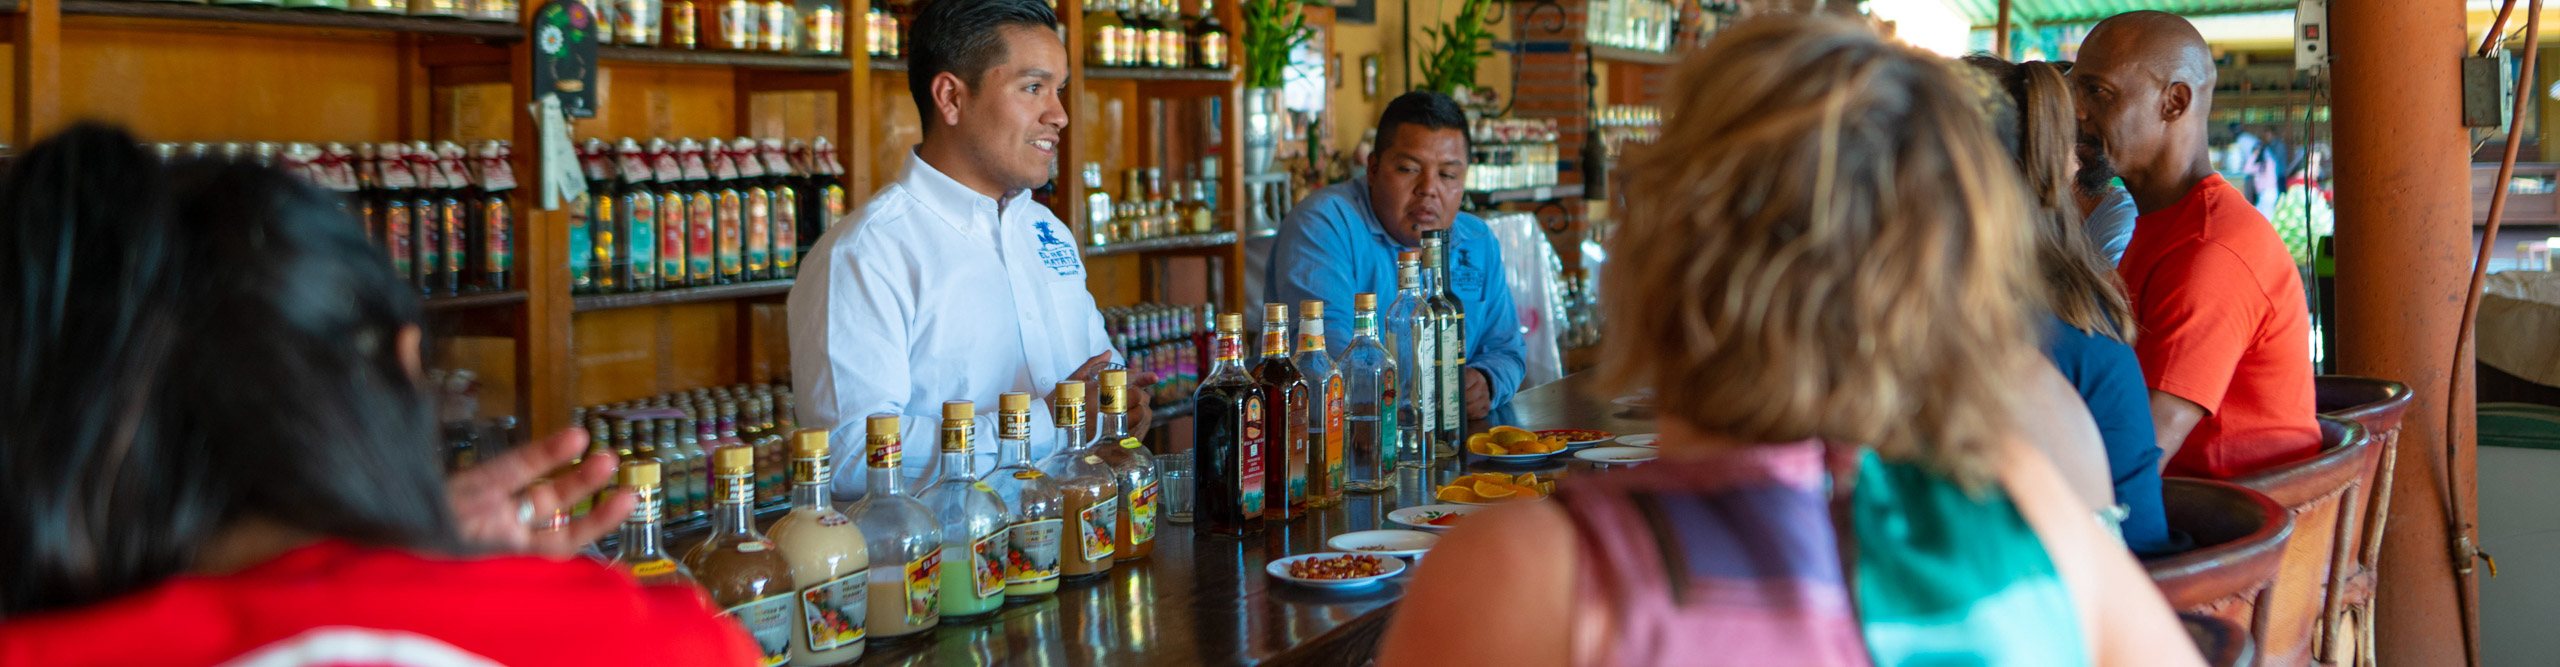 Group at bar doing tequila tasting in Mexico 